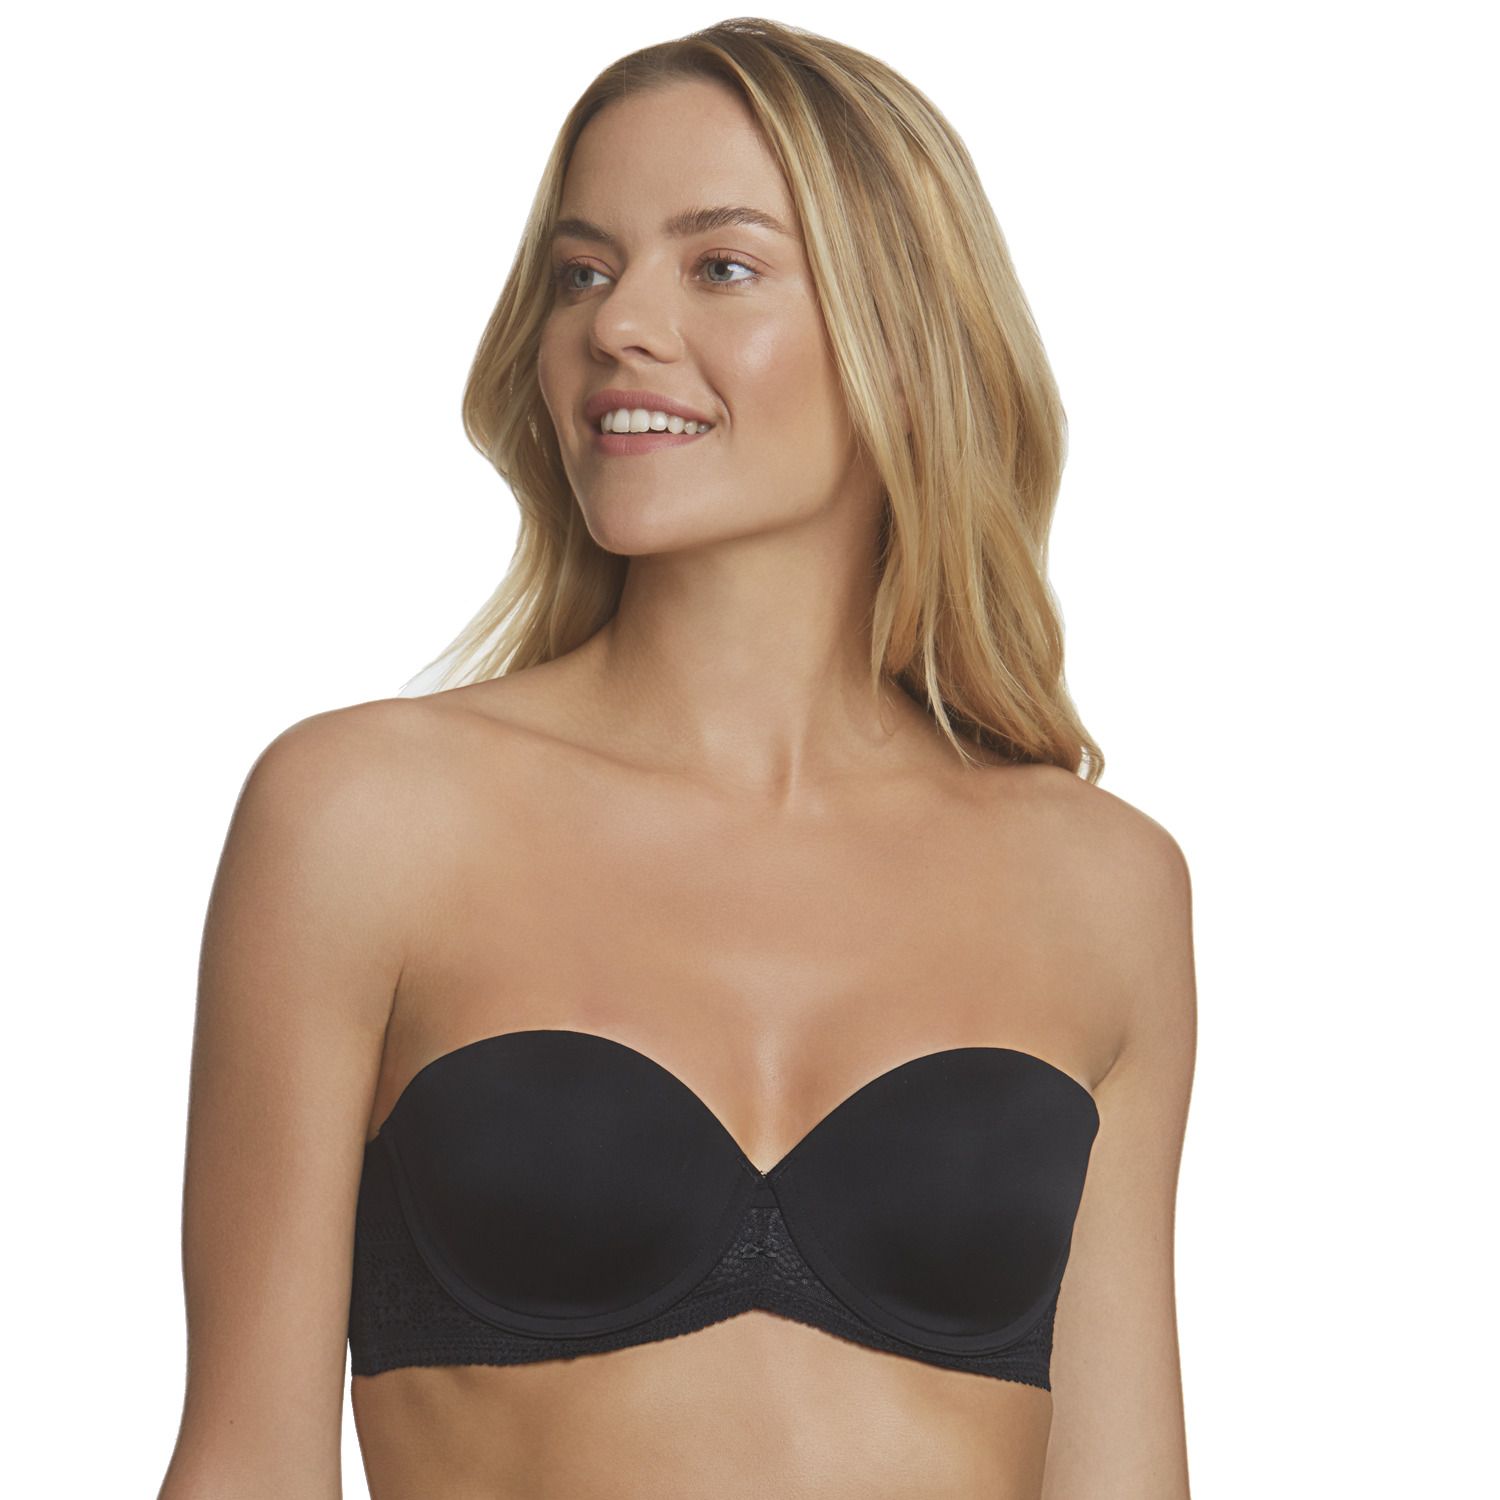 Image for Dominique Tessa Lace 4-Way Convertible Seamless Strapless Bra 7402 at Kohl's.